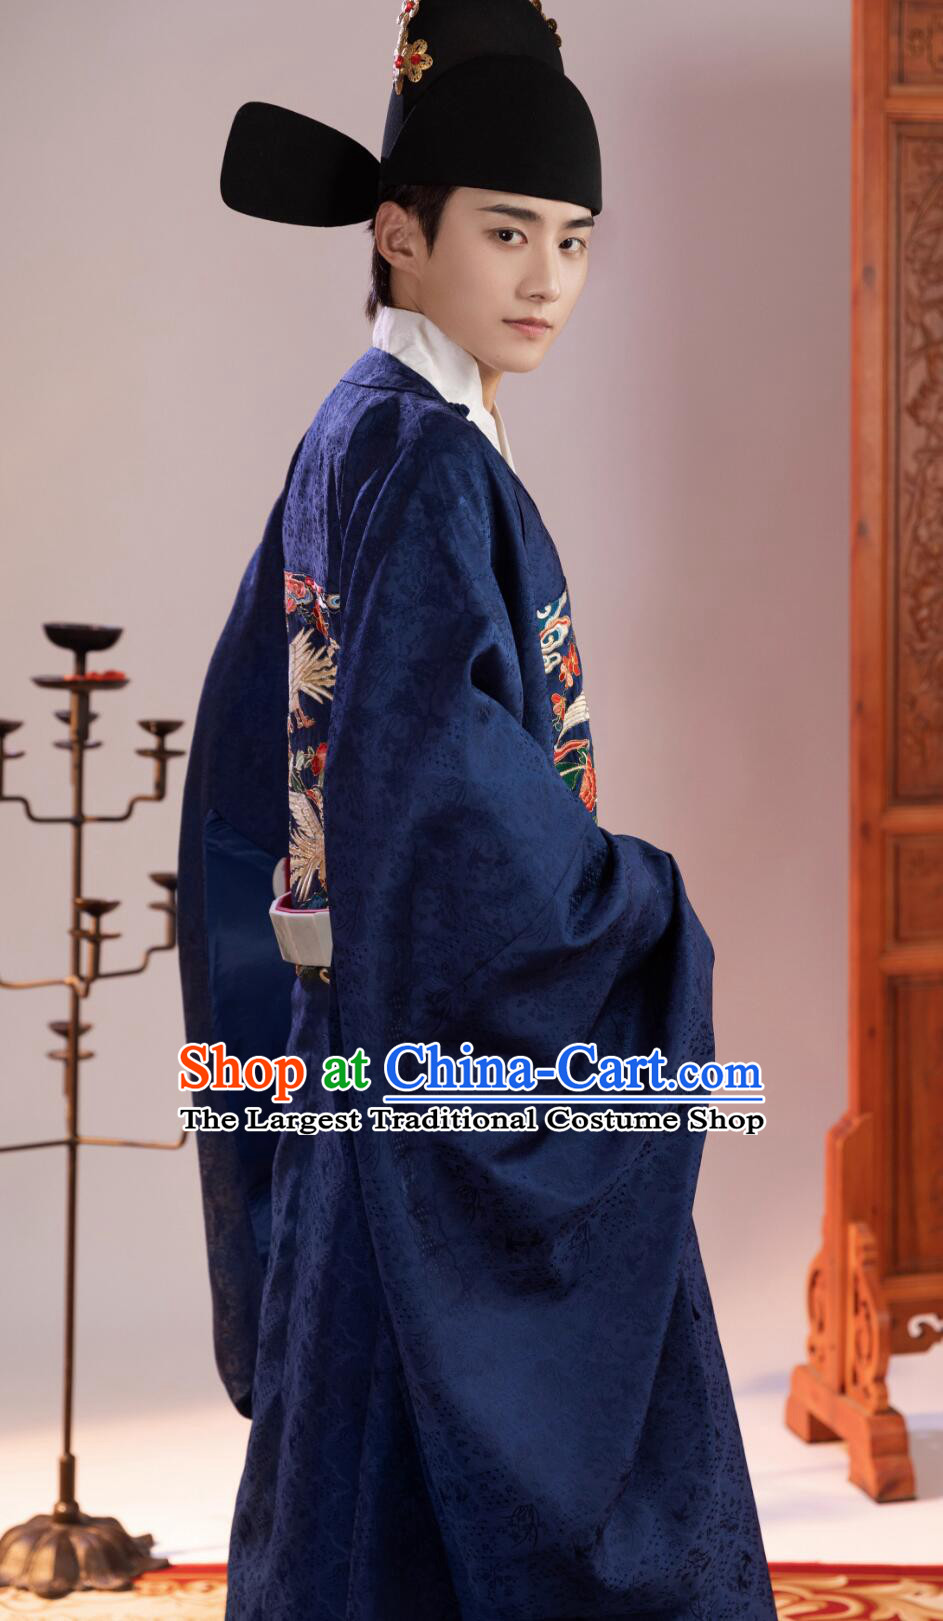 Navy Blue Chinese Embroidered Cranes Robe Ming Dynasty Court Costume Ancient China Fifth Rank Civil Official Clothing